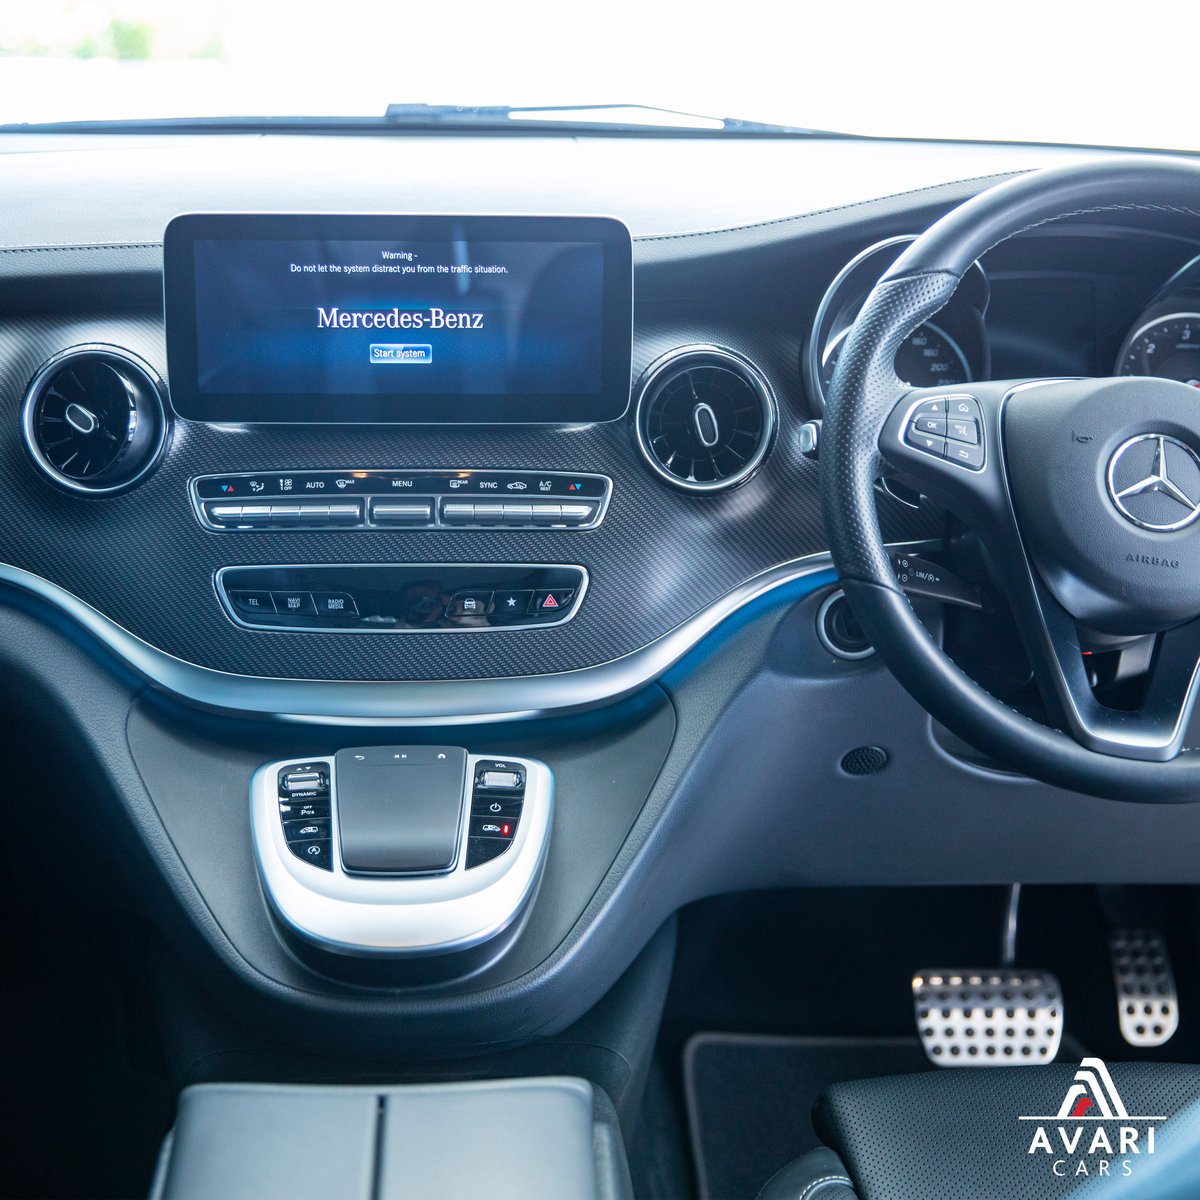 Let us discuss the interior of the Mercedes V300...😎

avaricars.co.za

#avaricars #fyp #thebigday #carclubsa
#carrentals #carrentalservice #rentalcars